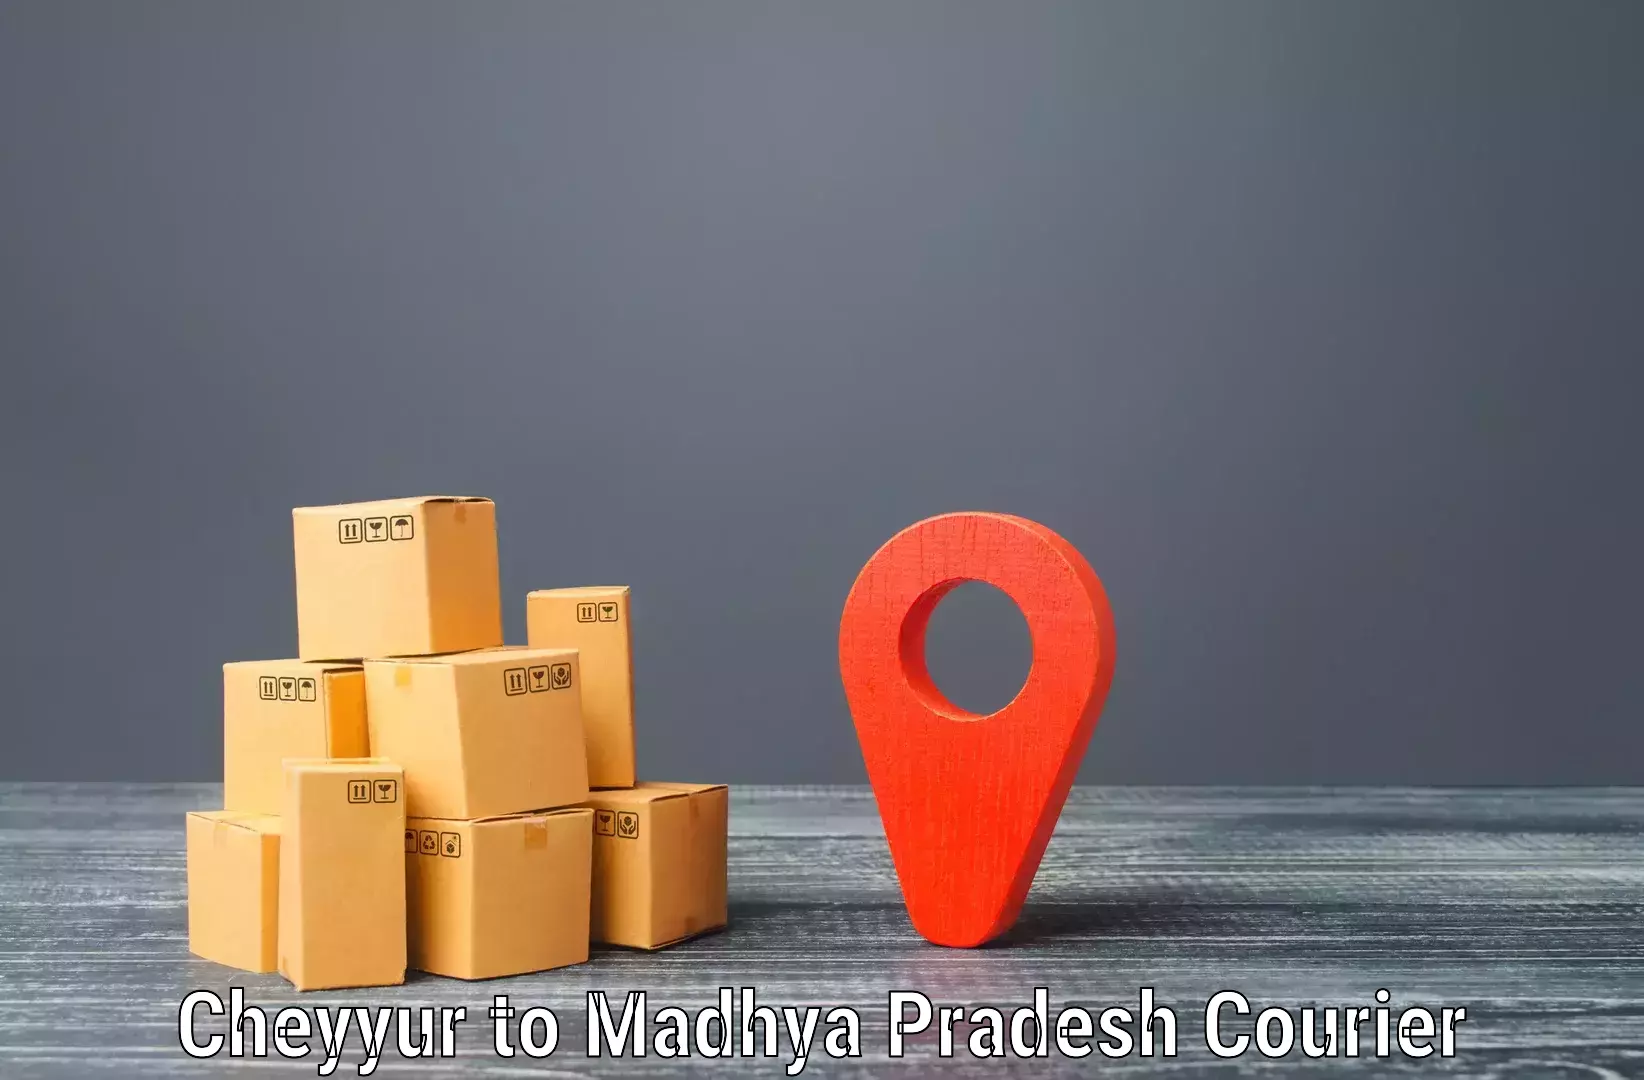 Nationwide parcel services Cheyyur to Anuppur